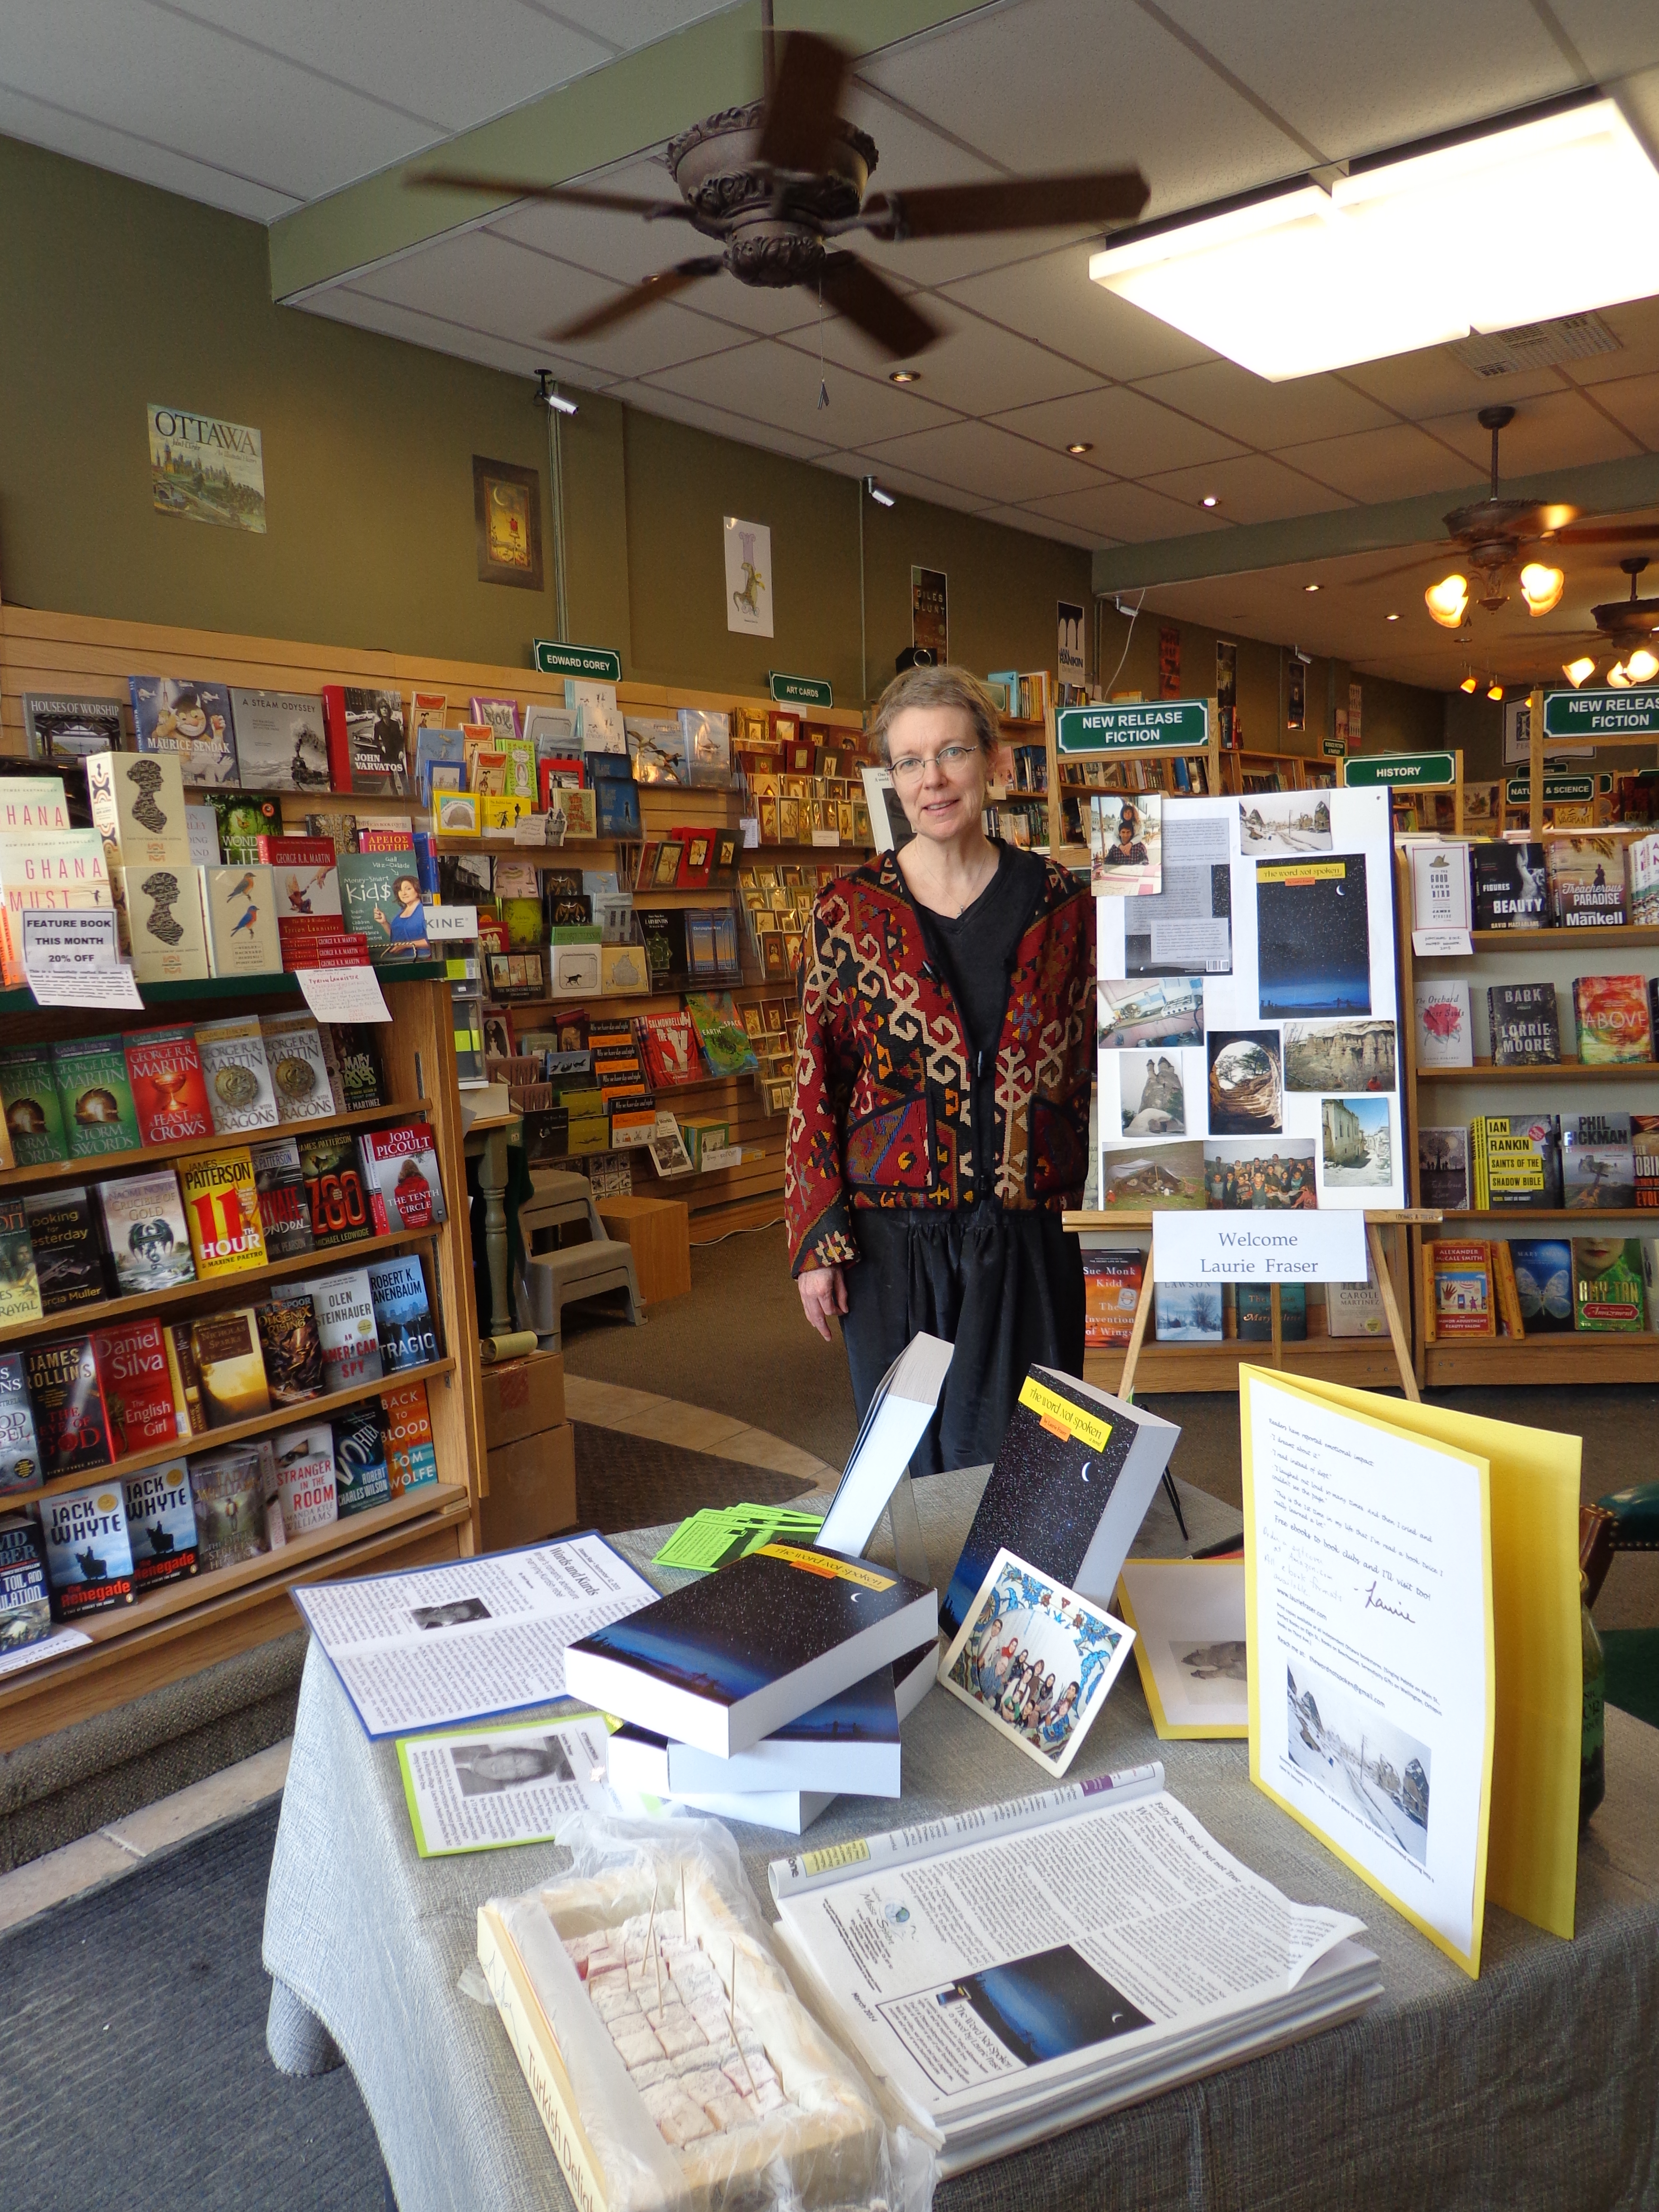 Mission accompished- Meet the author at Perfect Books